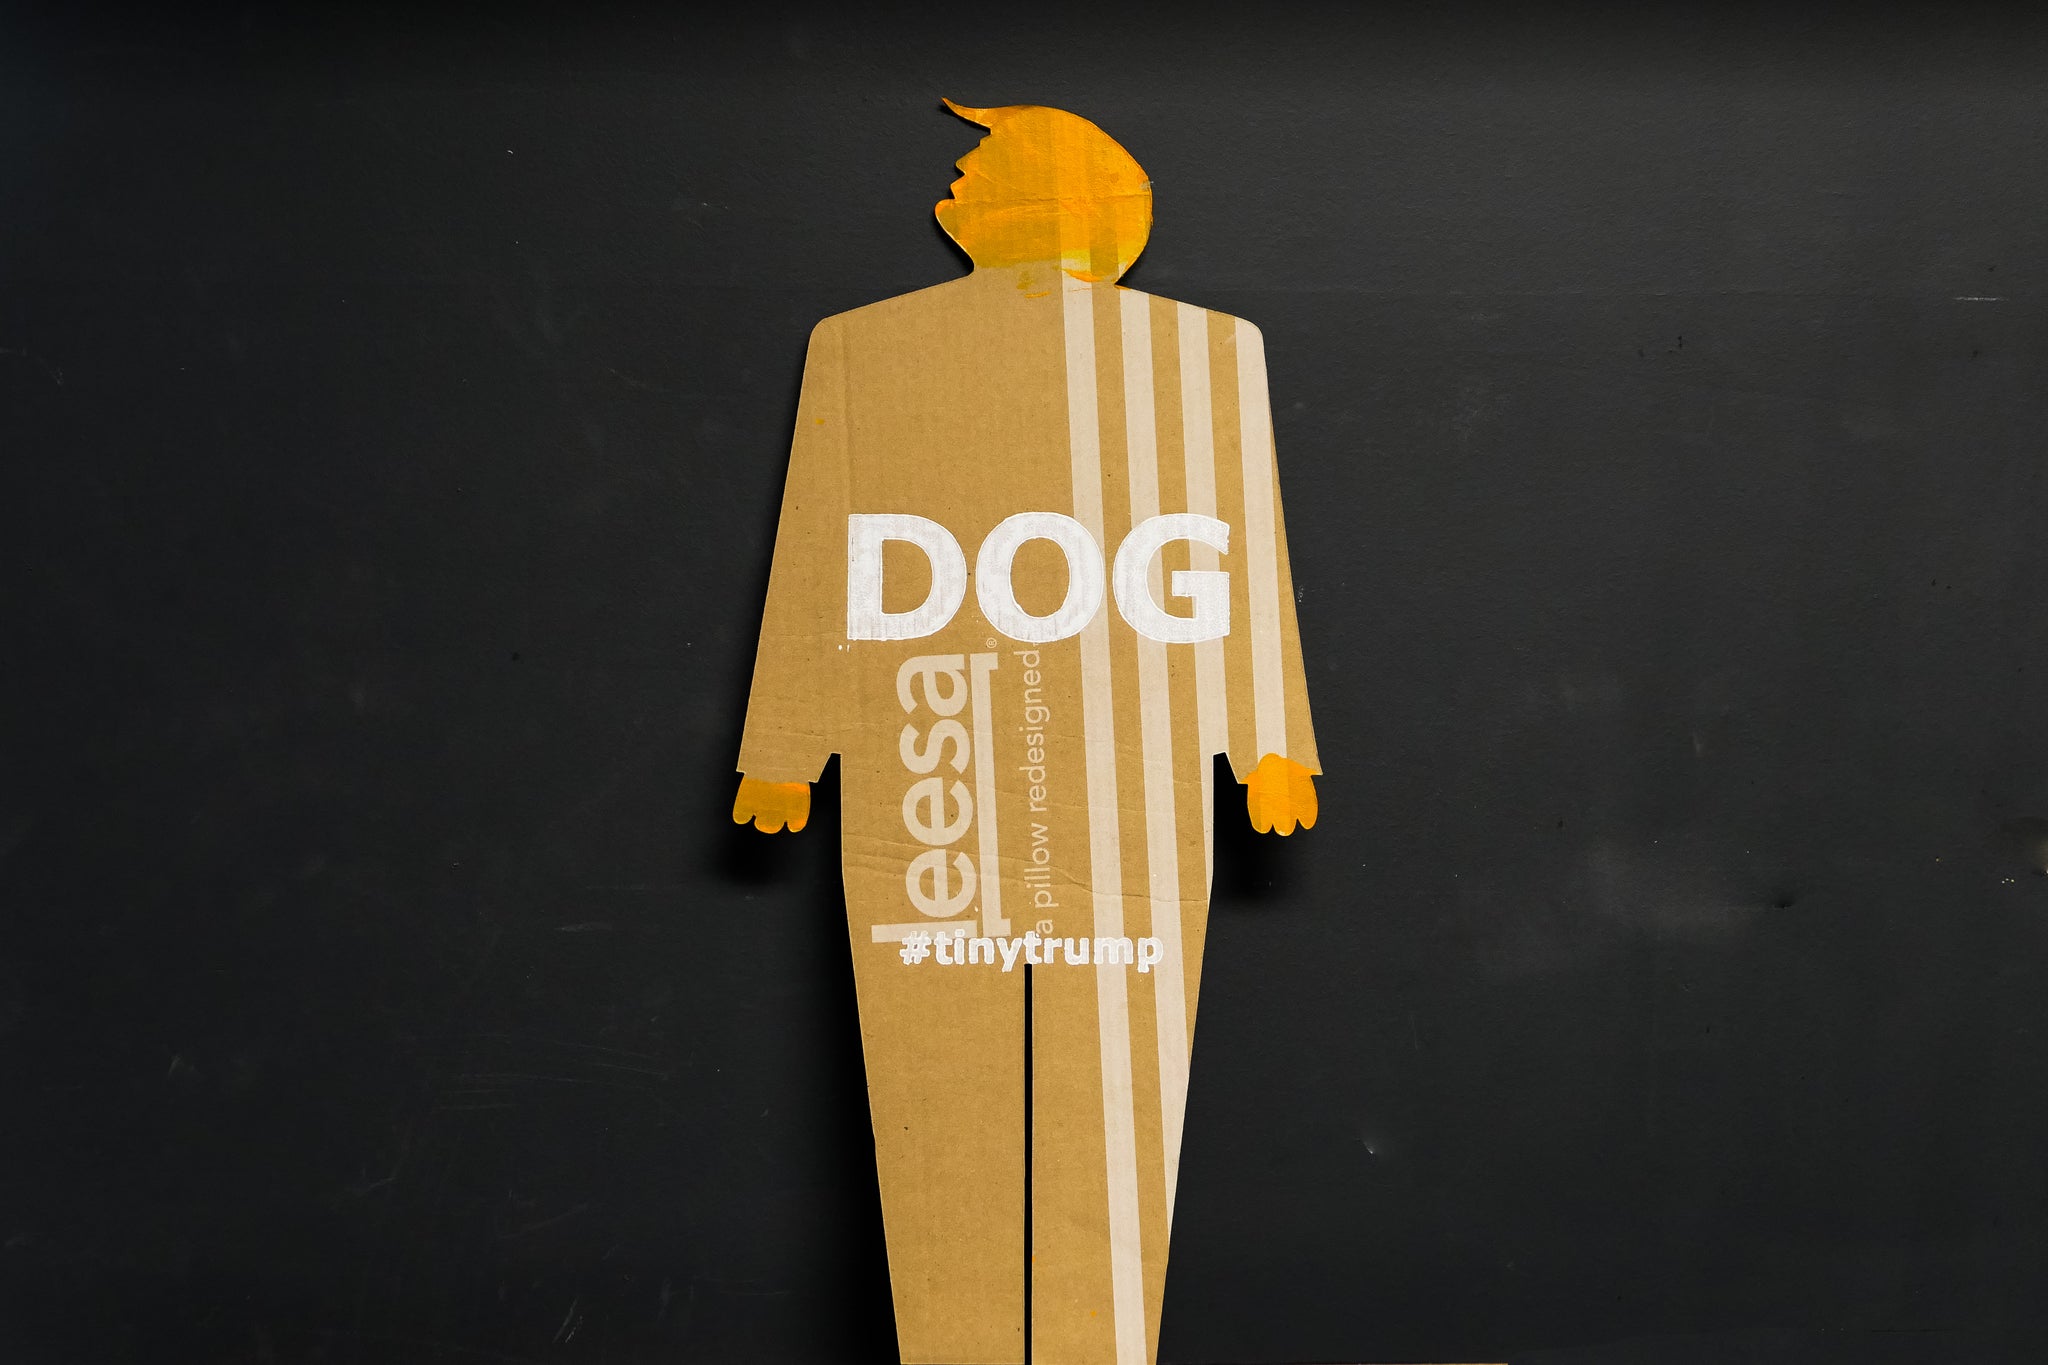 A two foot tall, cardboard tiny trump with the slogan "Dog"